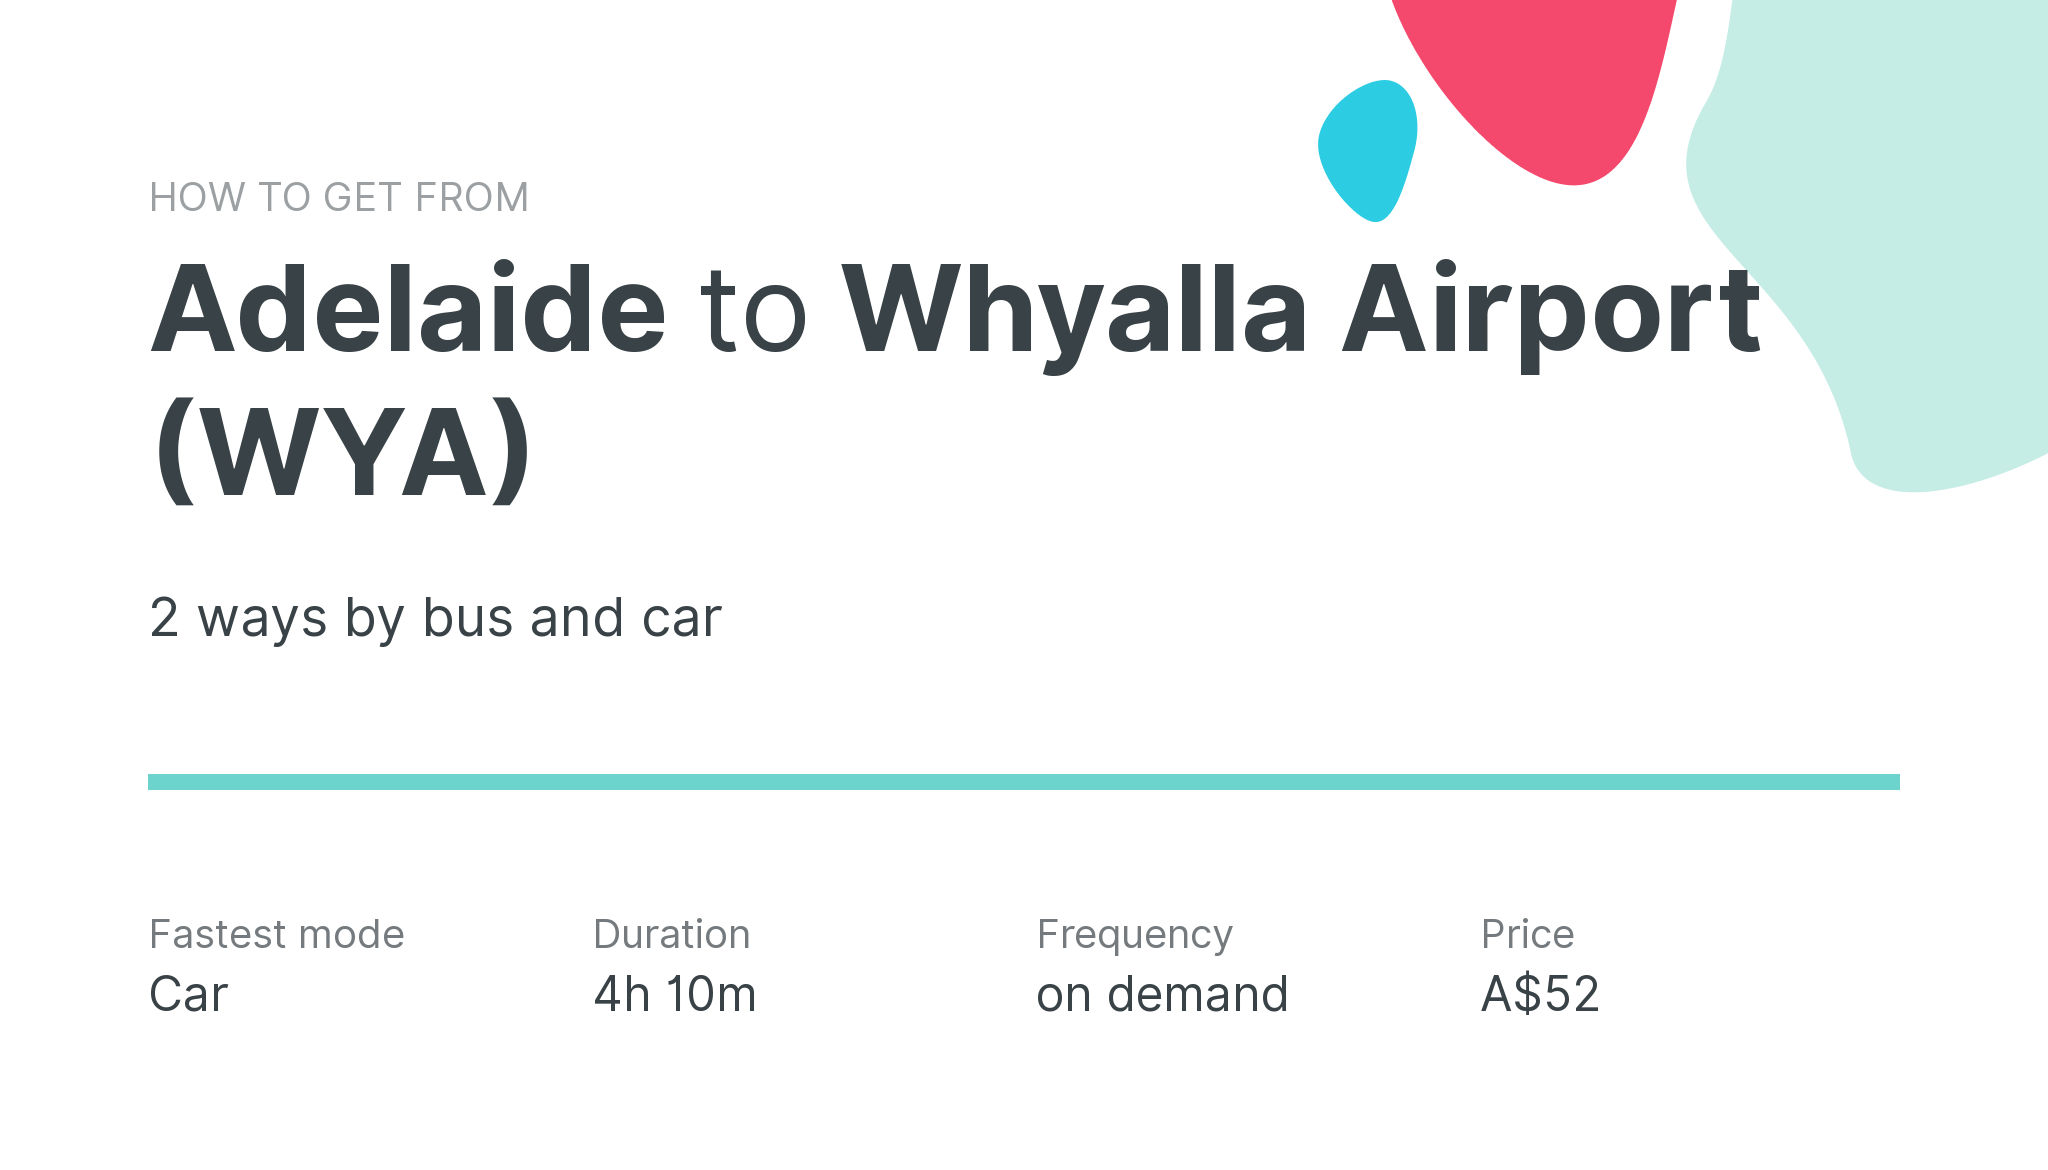 How do I get from Adelaide to Whyalla Airport (WYA)